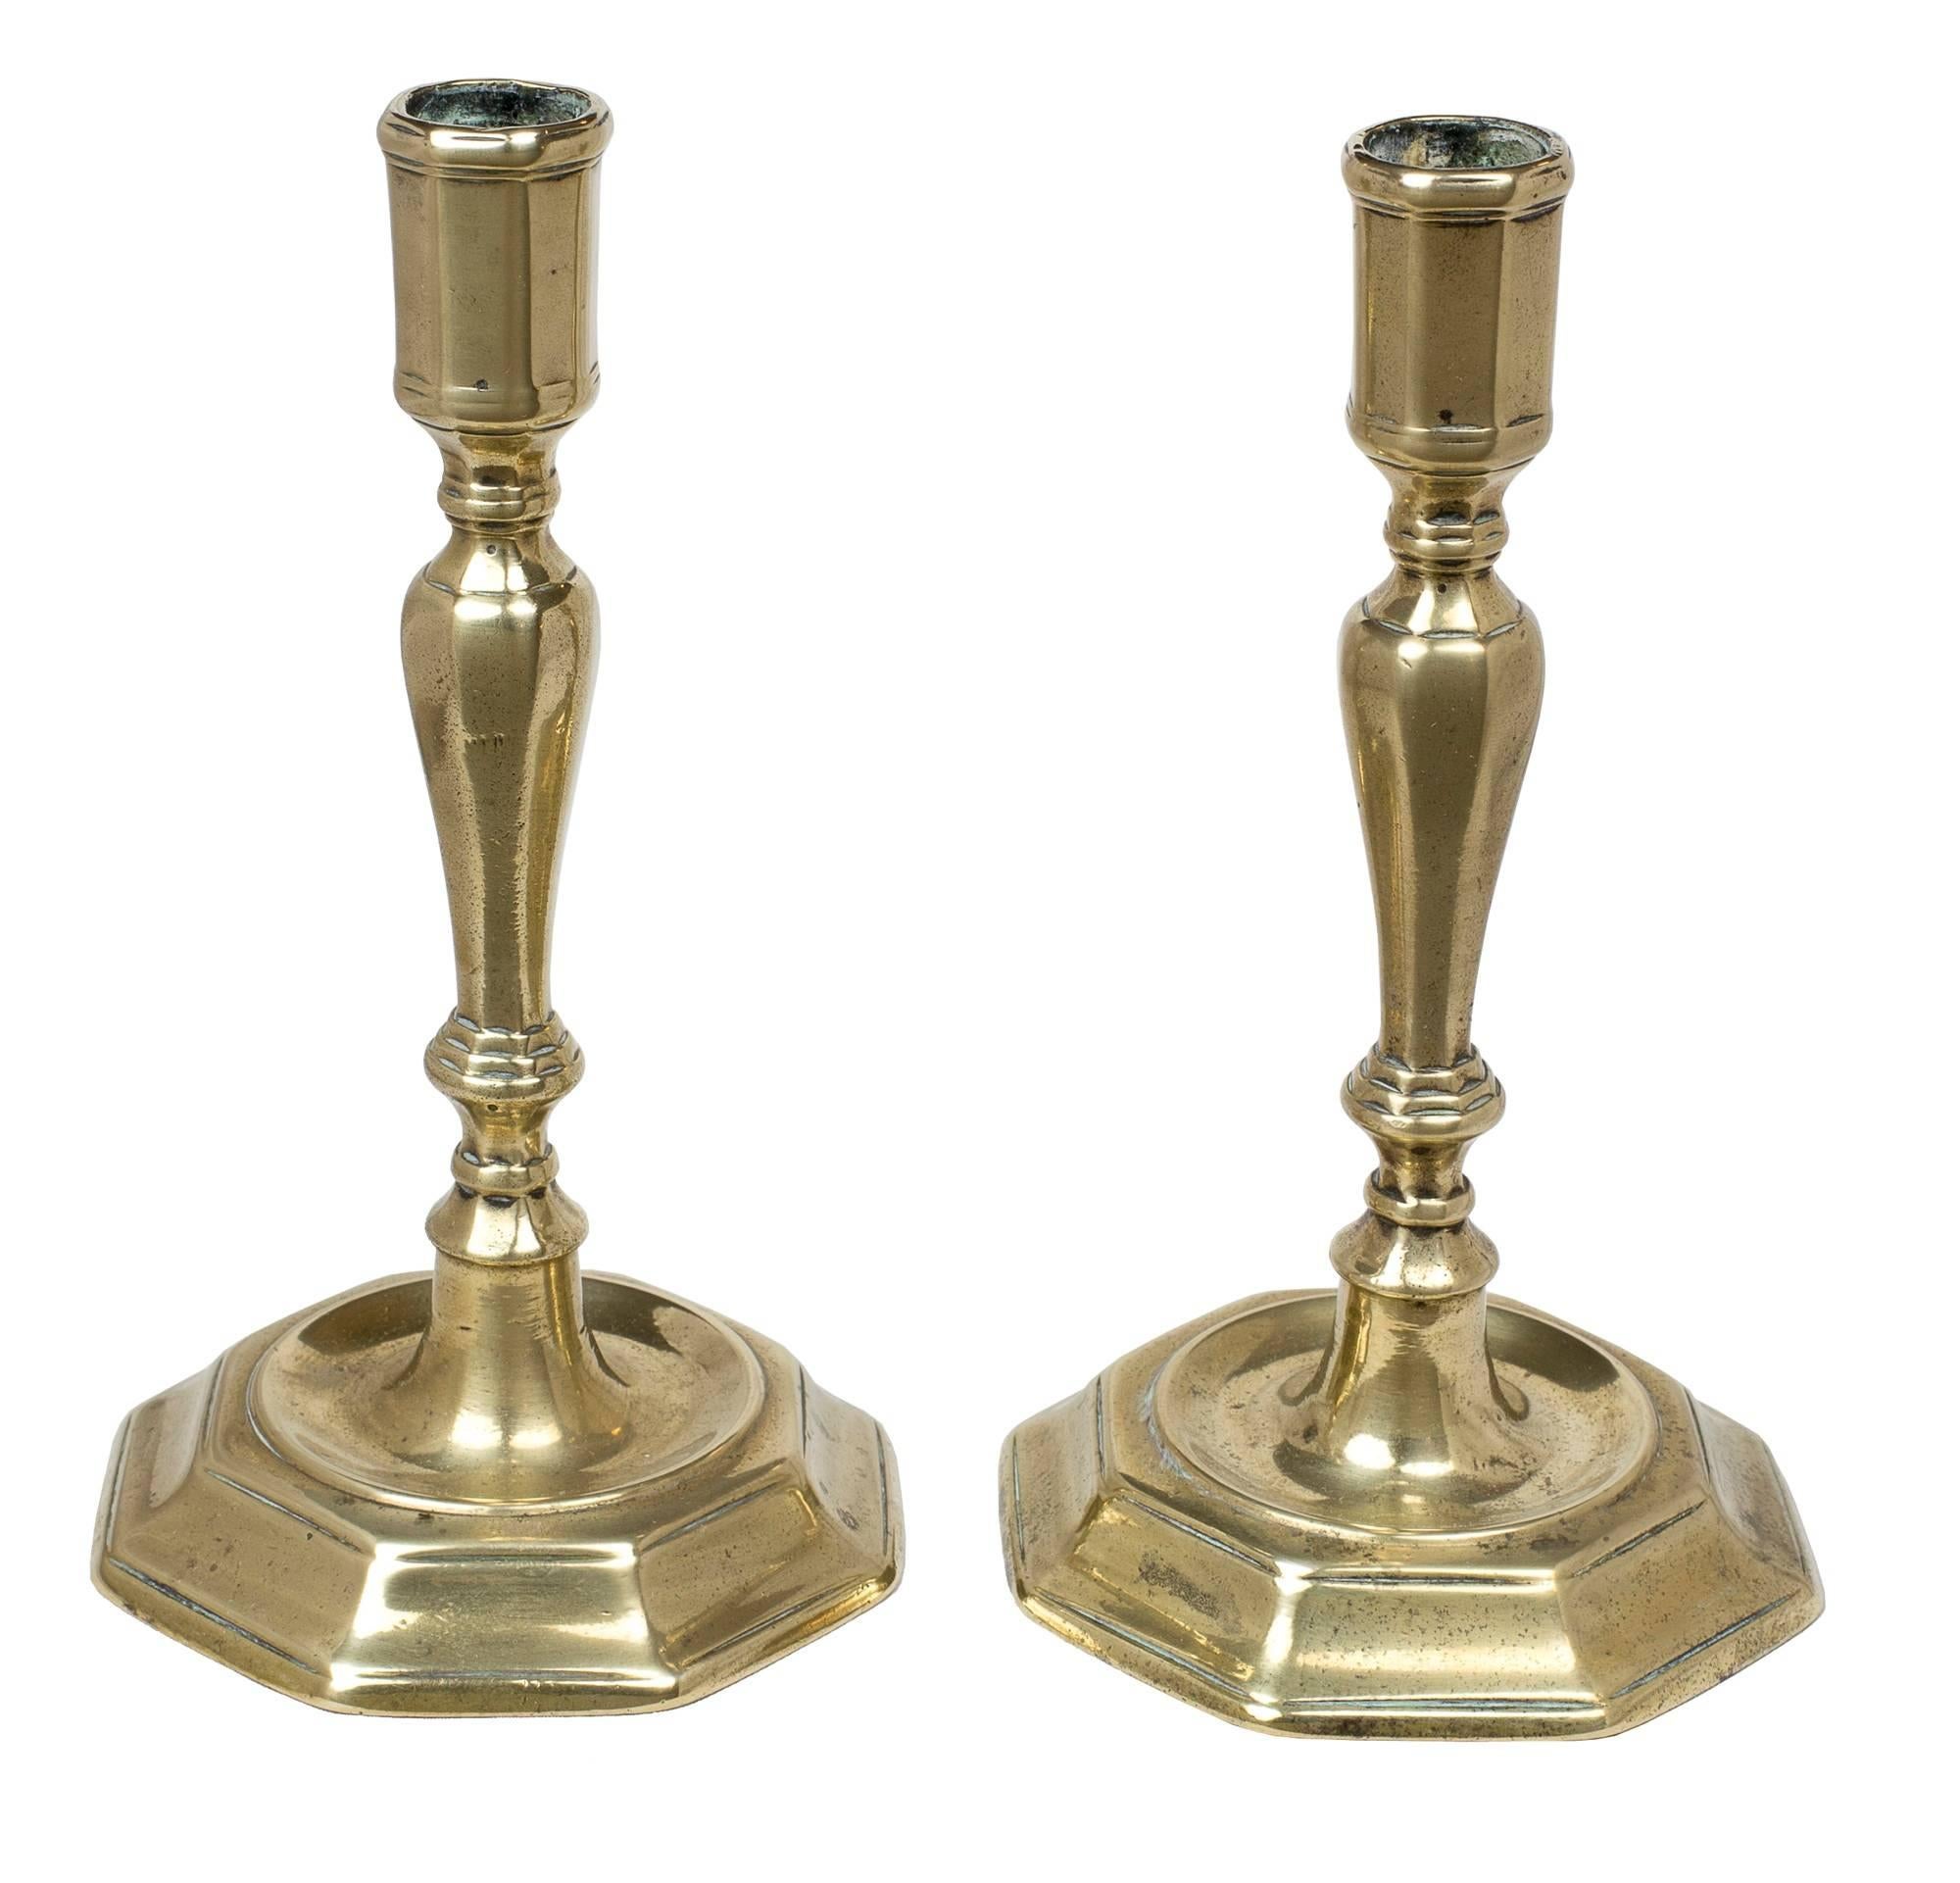 These candlesticks have a molded octagonal base with knapped baluster standard and paneled or cylindrical nozzle.

A related candlestick of similar design and origin is illustrated in The Brass Book, by Peter, Nancy, and Herbert Schiffer (see scan